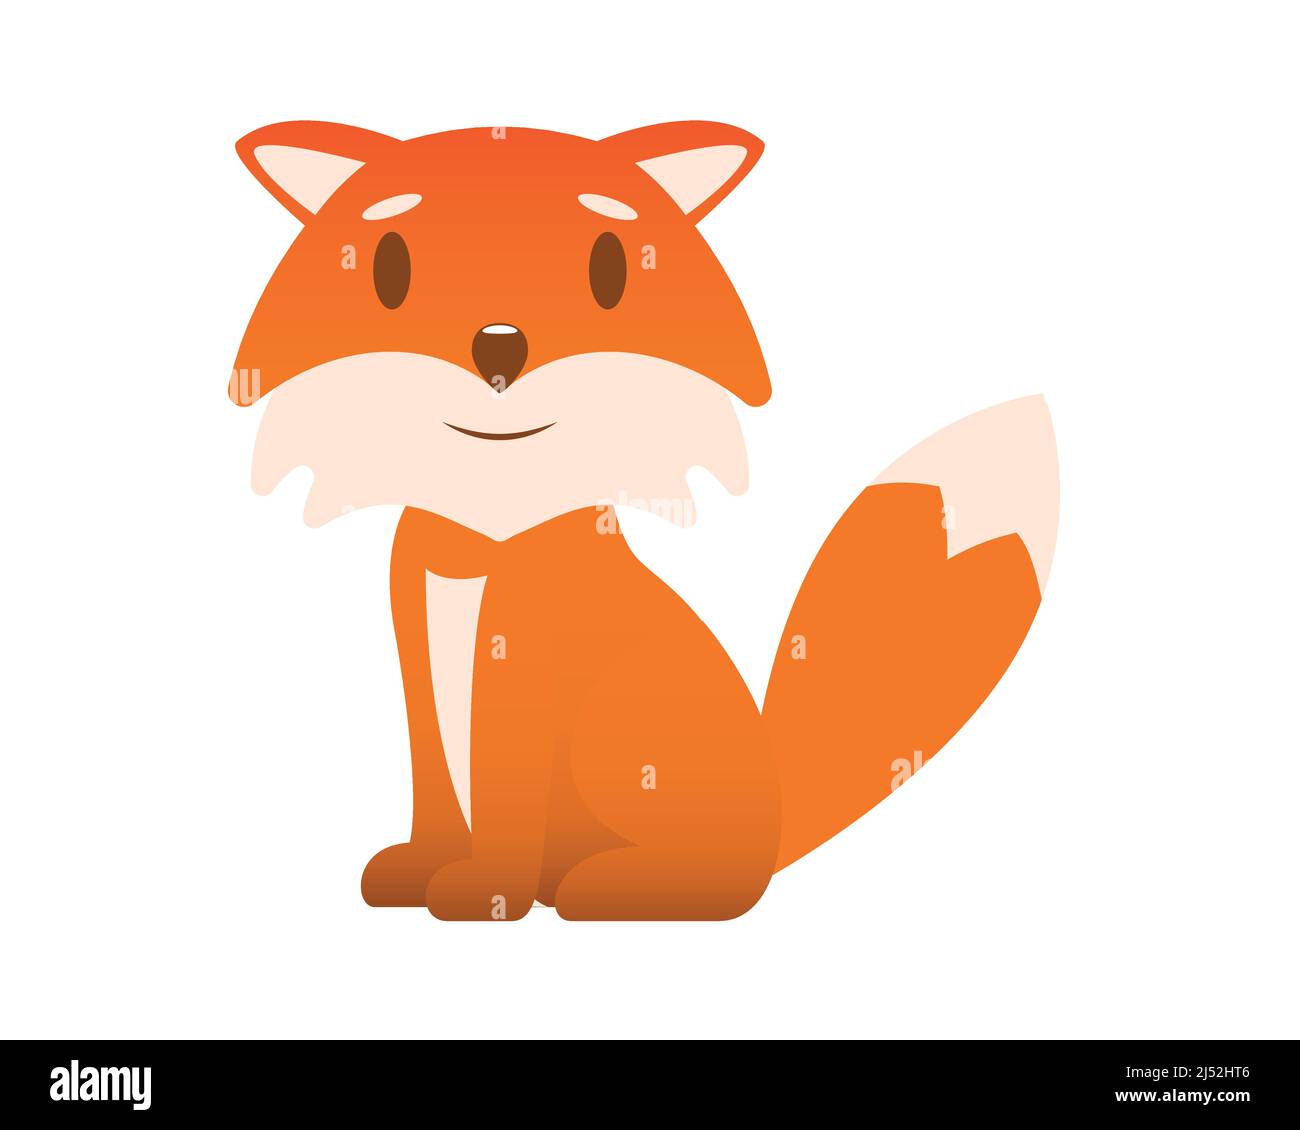 Cute and Sweet Fox with Sitting Gesture Illustration Vector Stock Vector